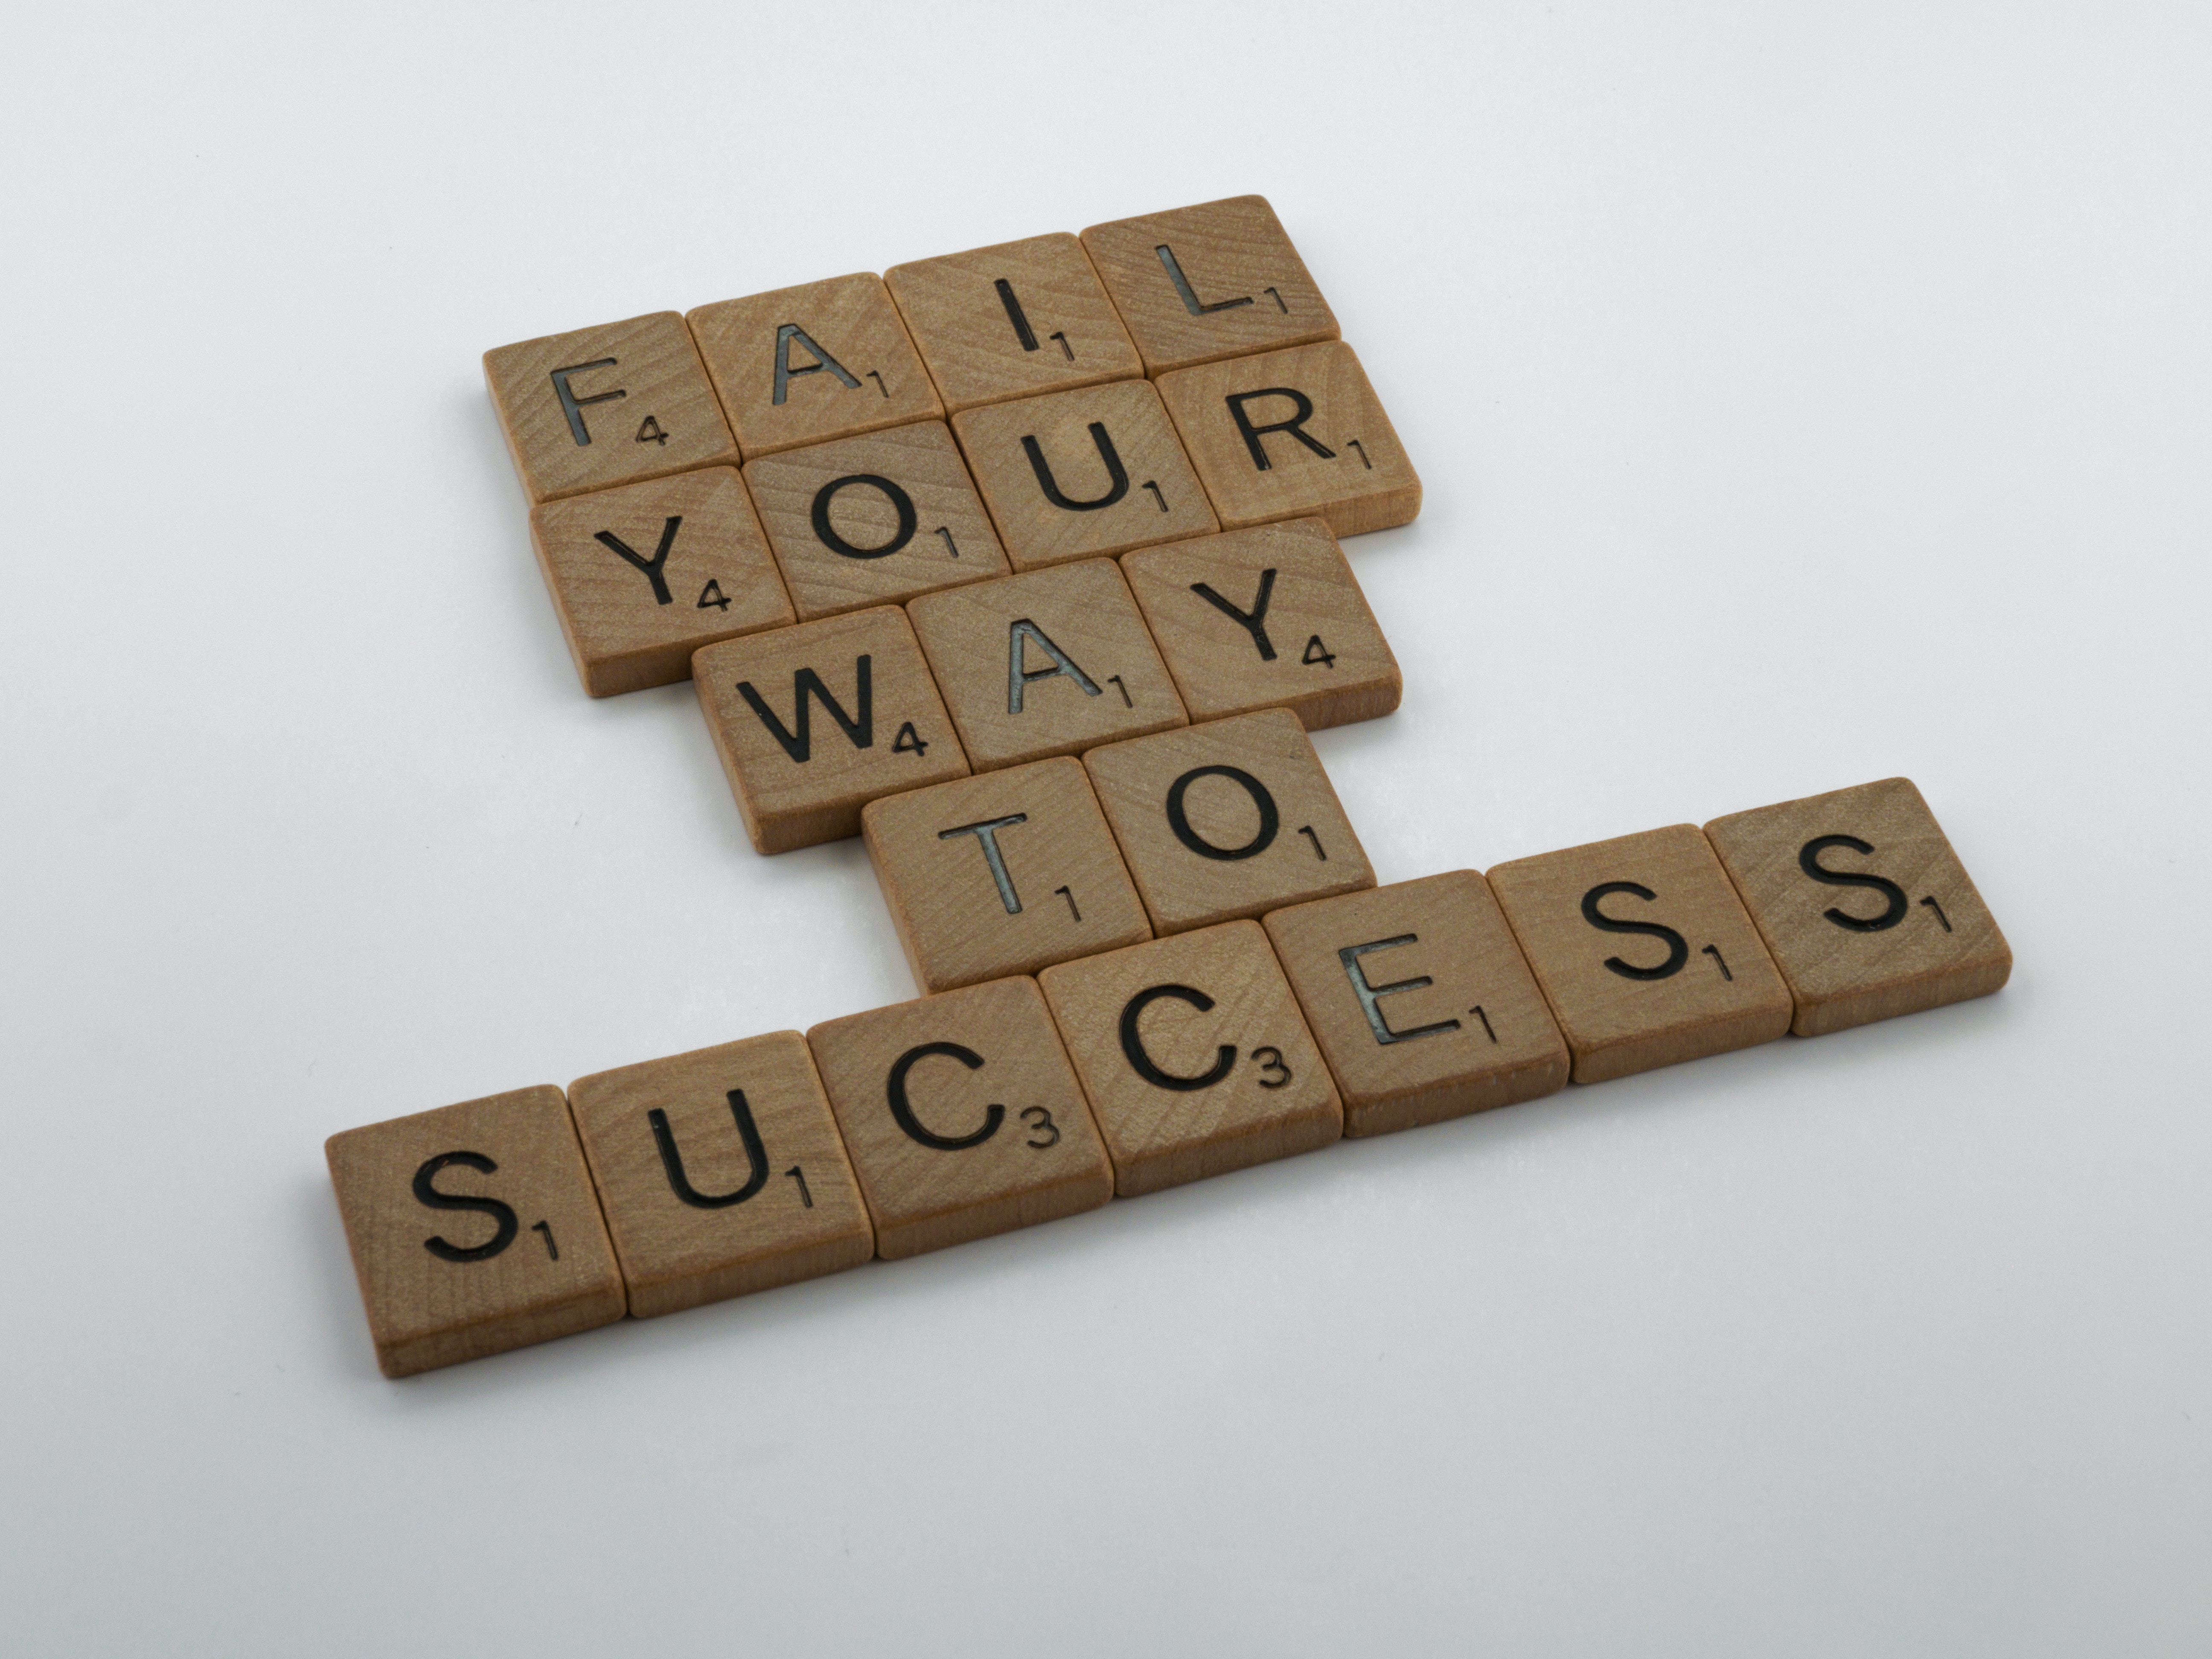 Scrabble tiles that spell out "Fail your way to Success"